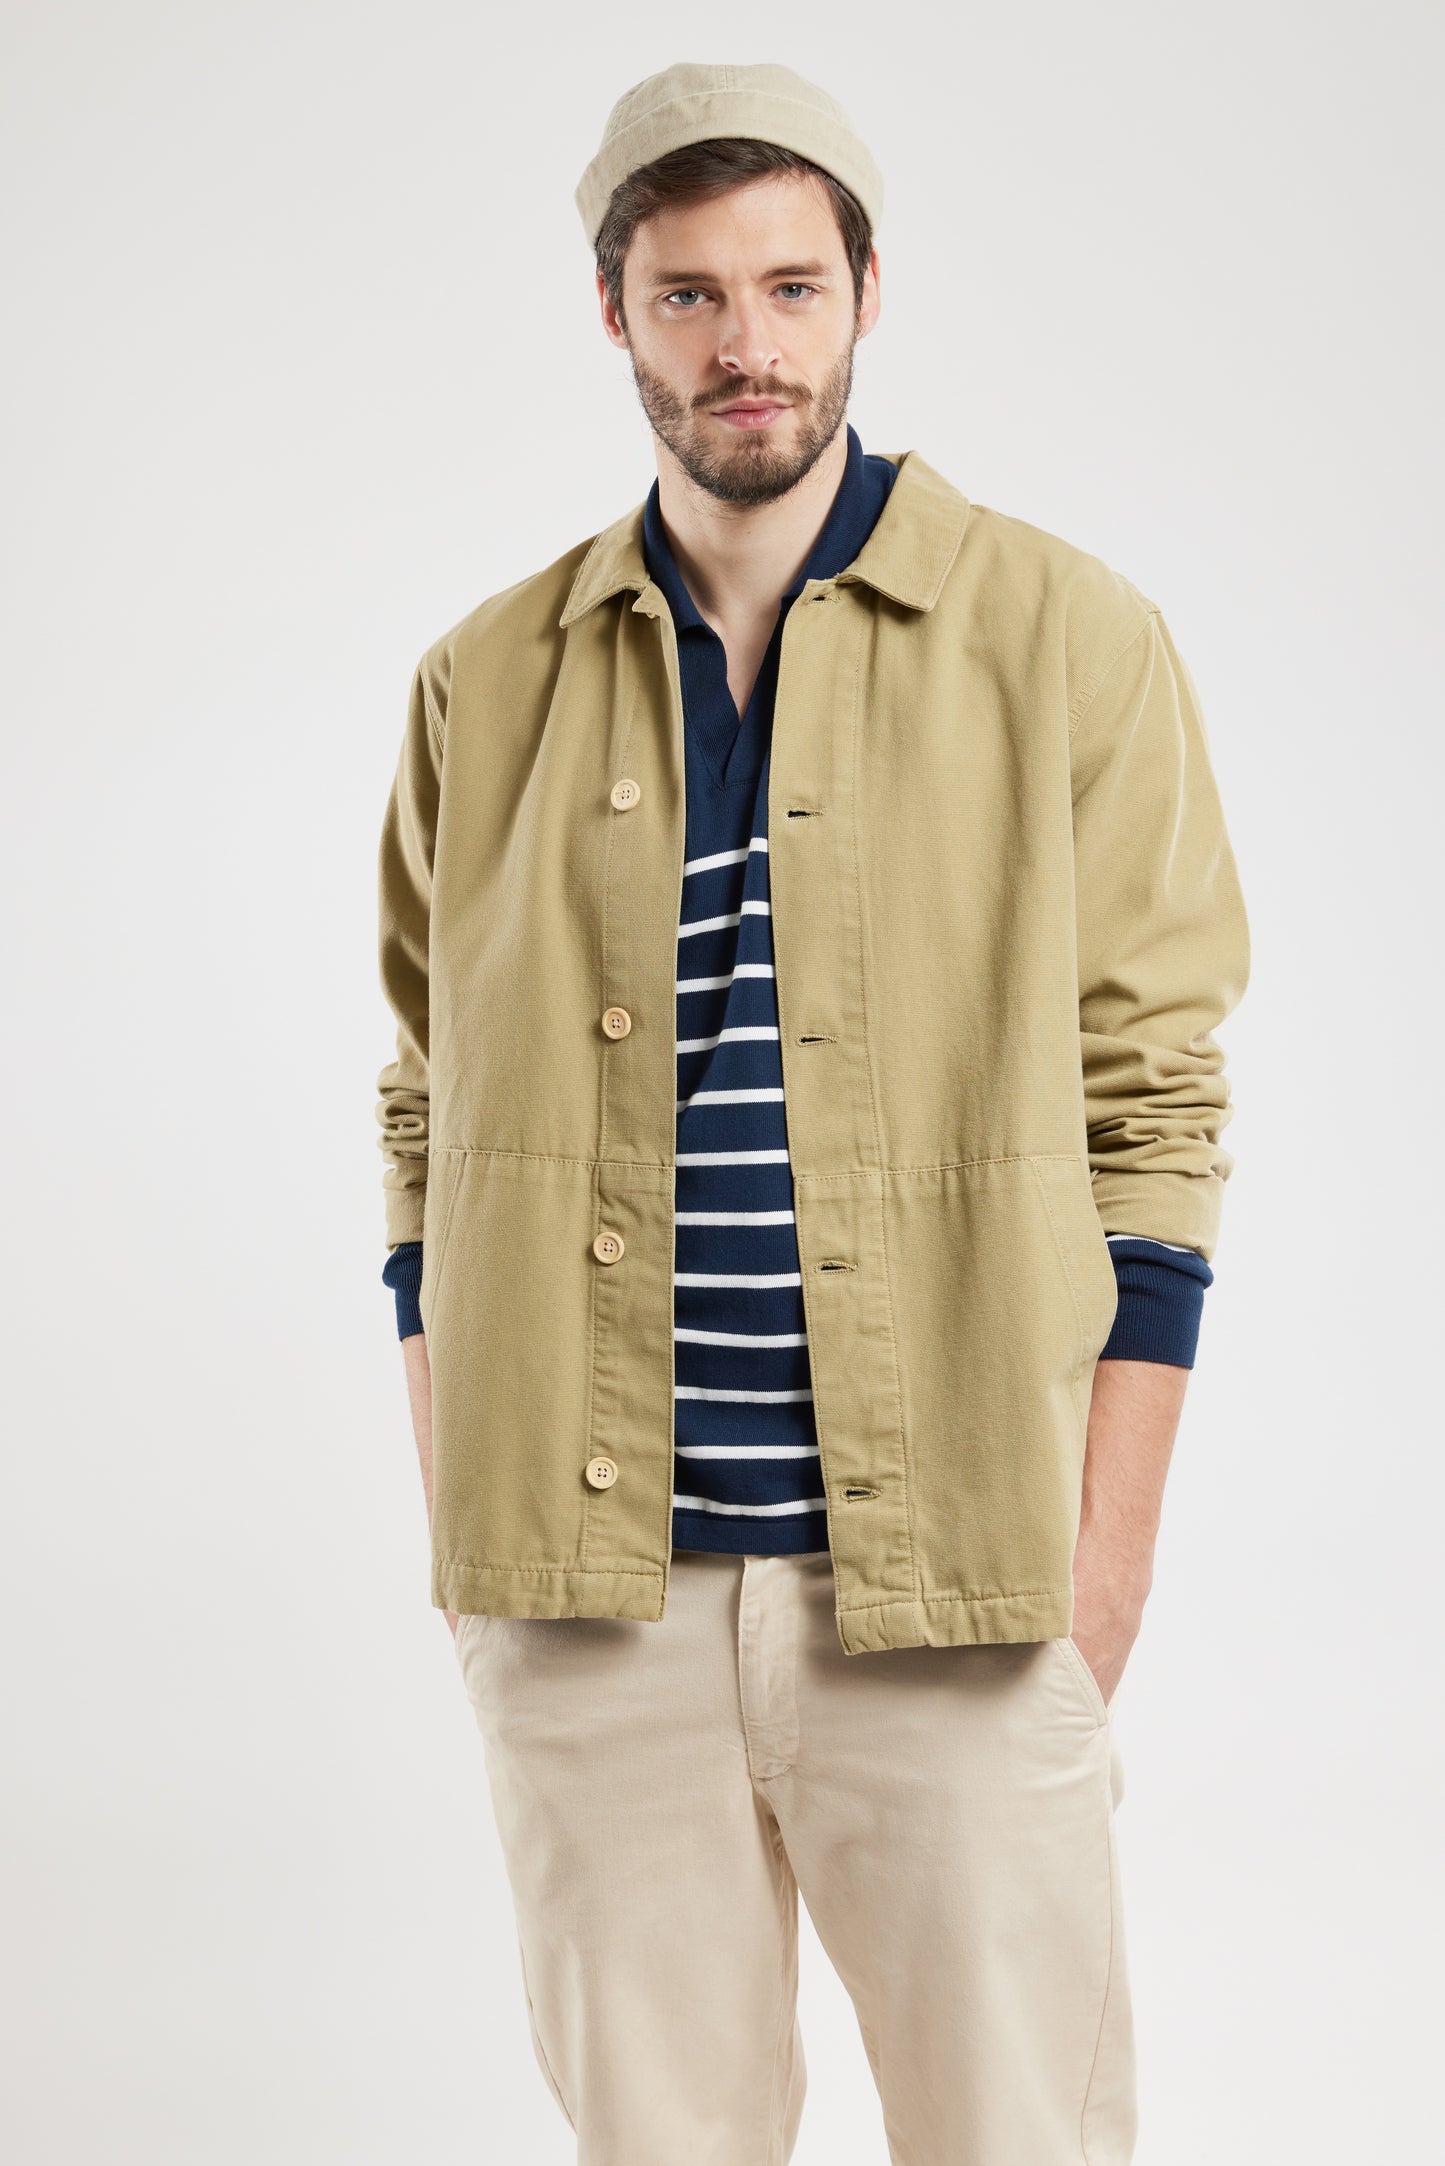 Armor Lux Fisherman's Jacket Heritage in Pale Olive